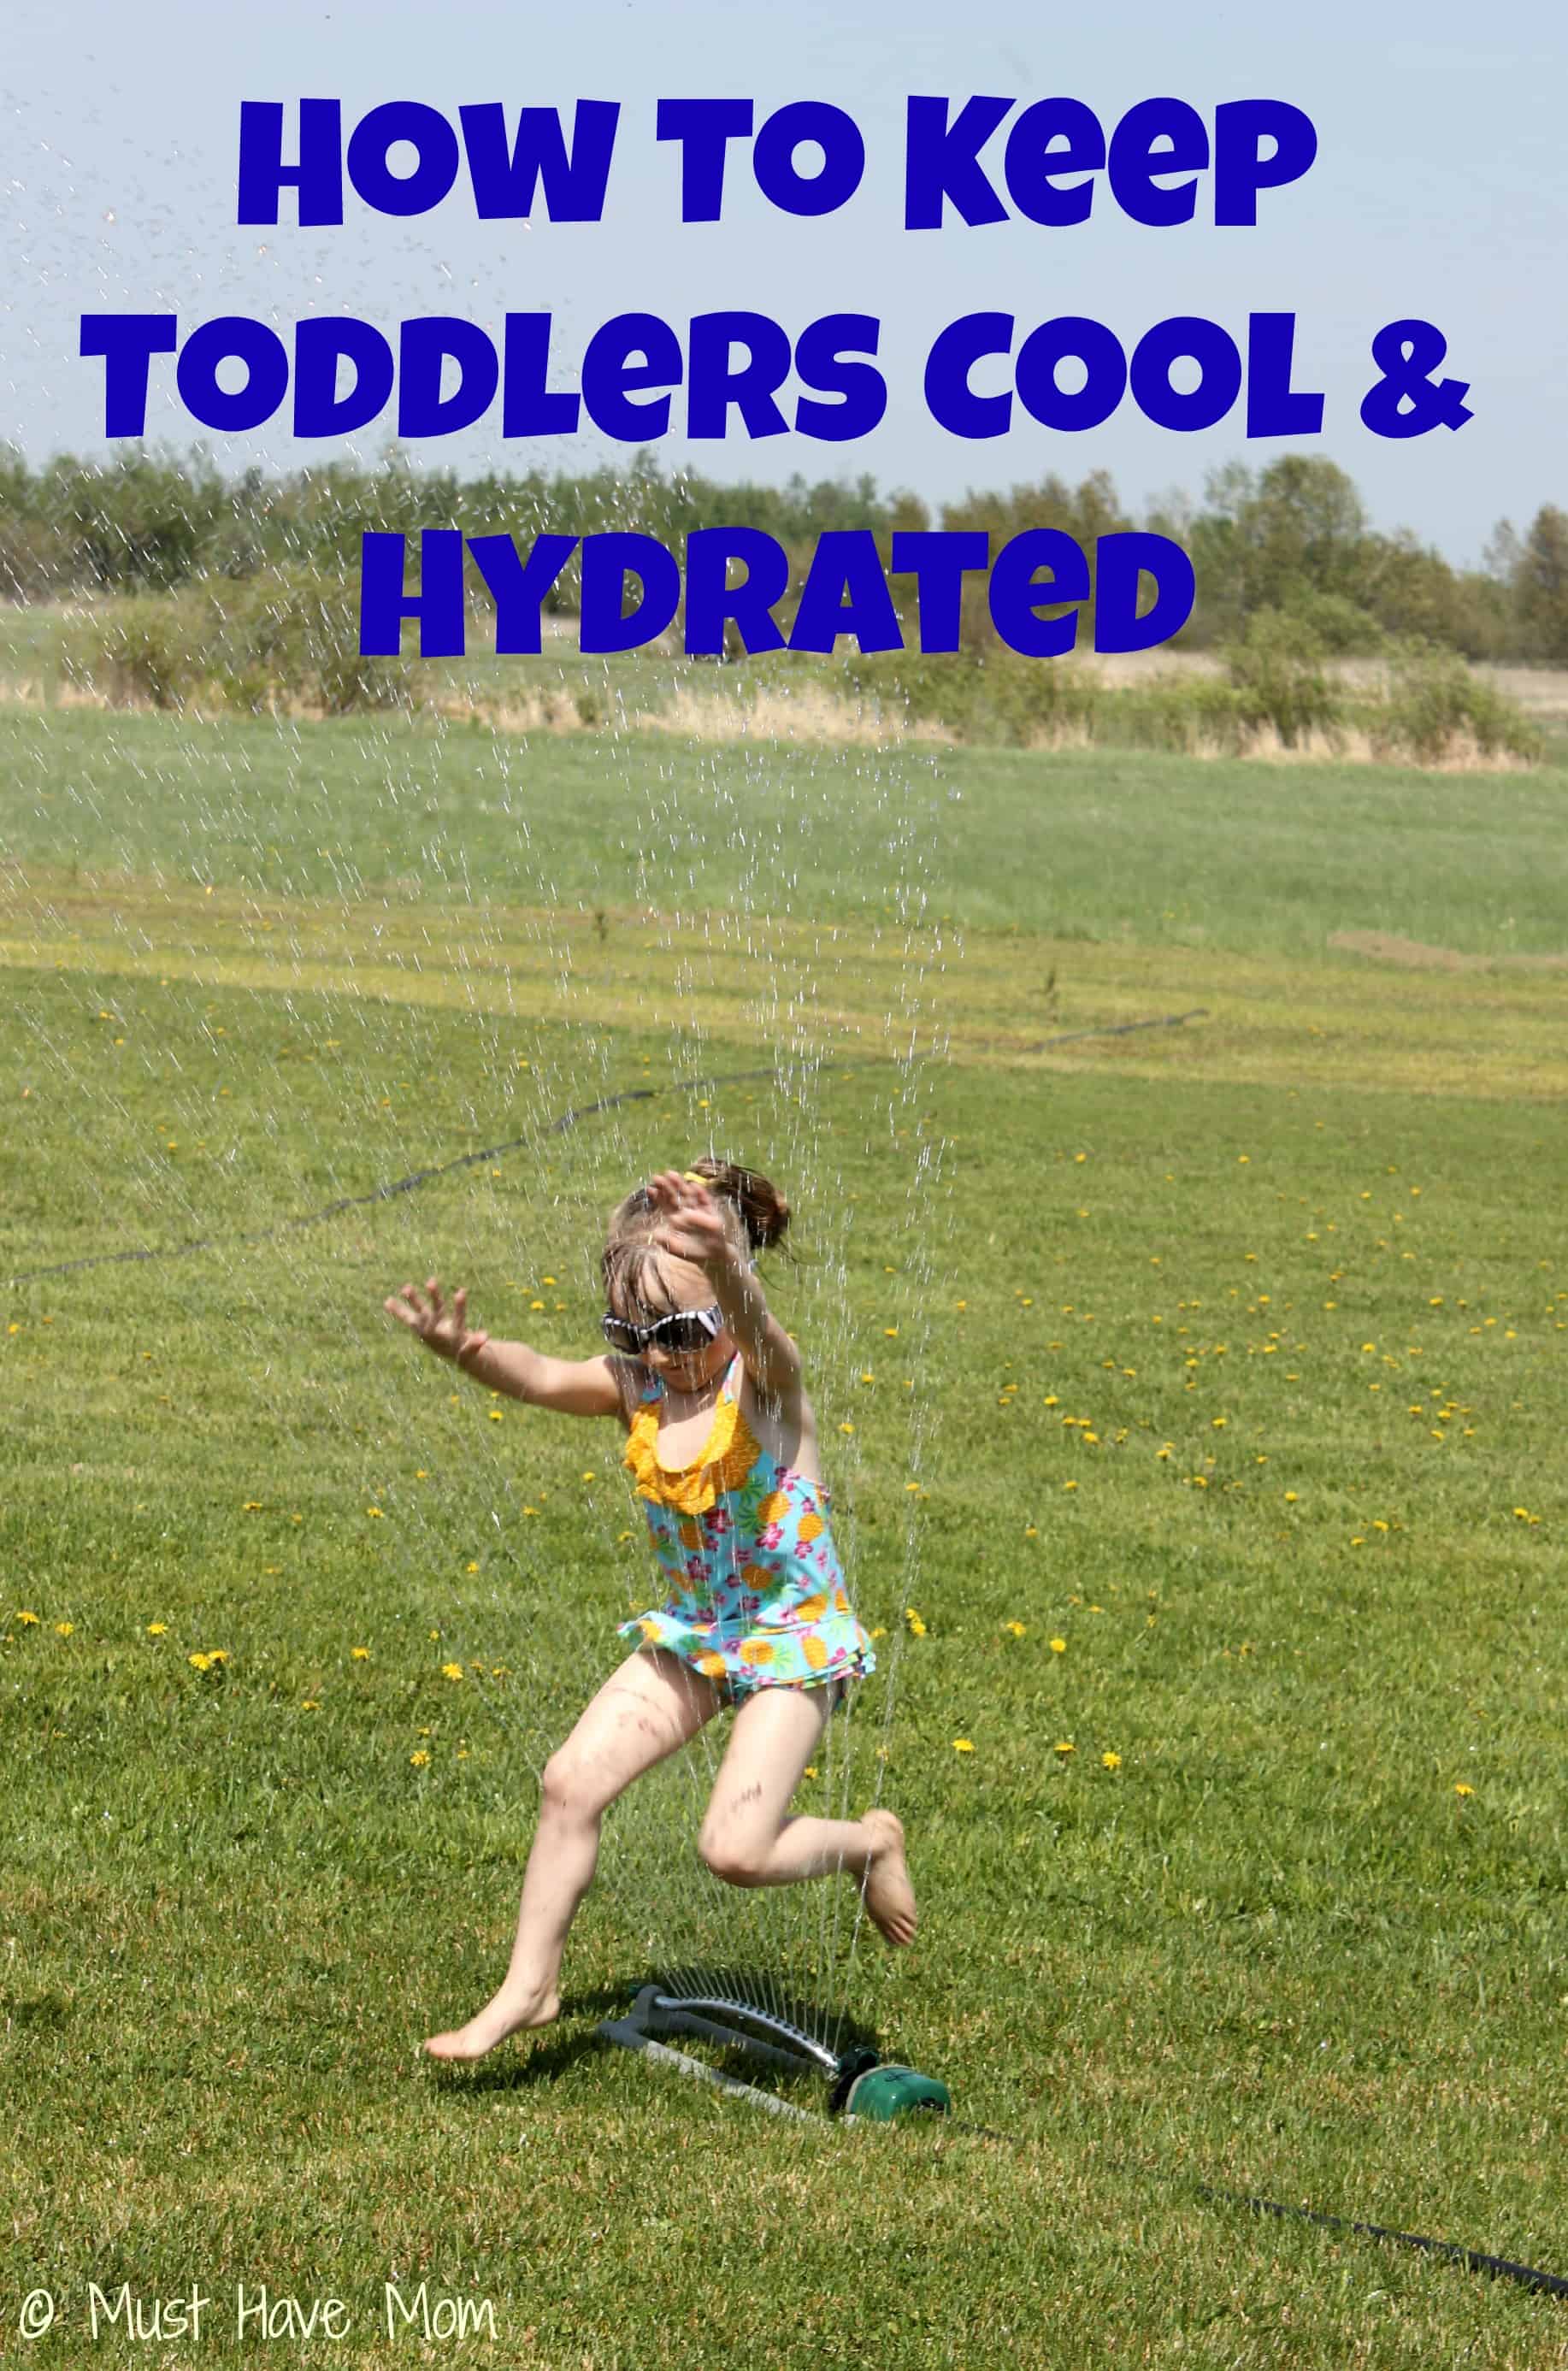 How to keep toddlers cool & hydrated - Must Have Mom